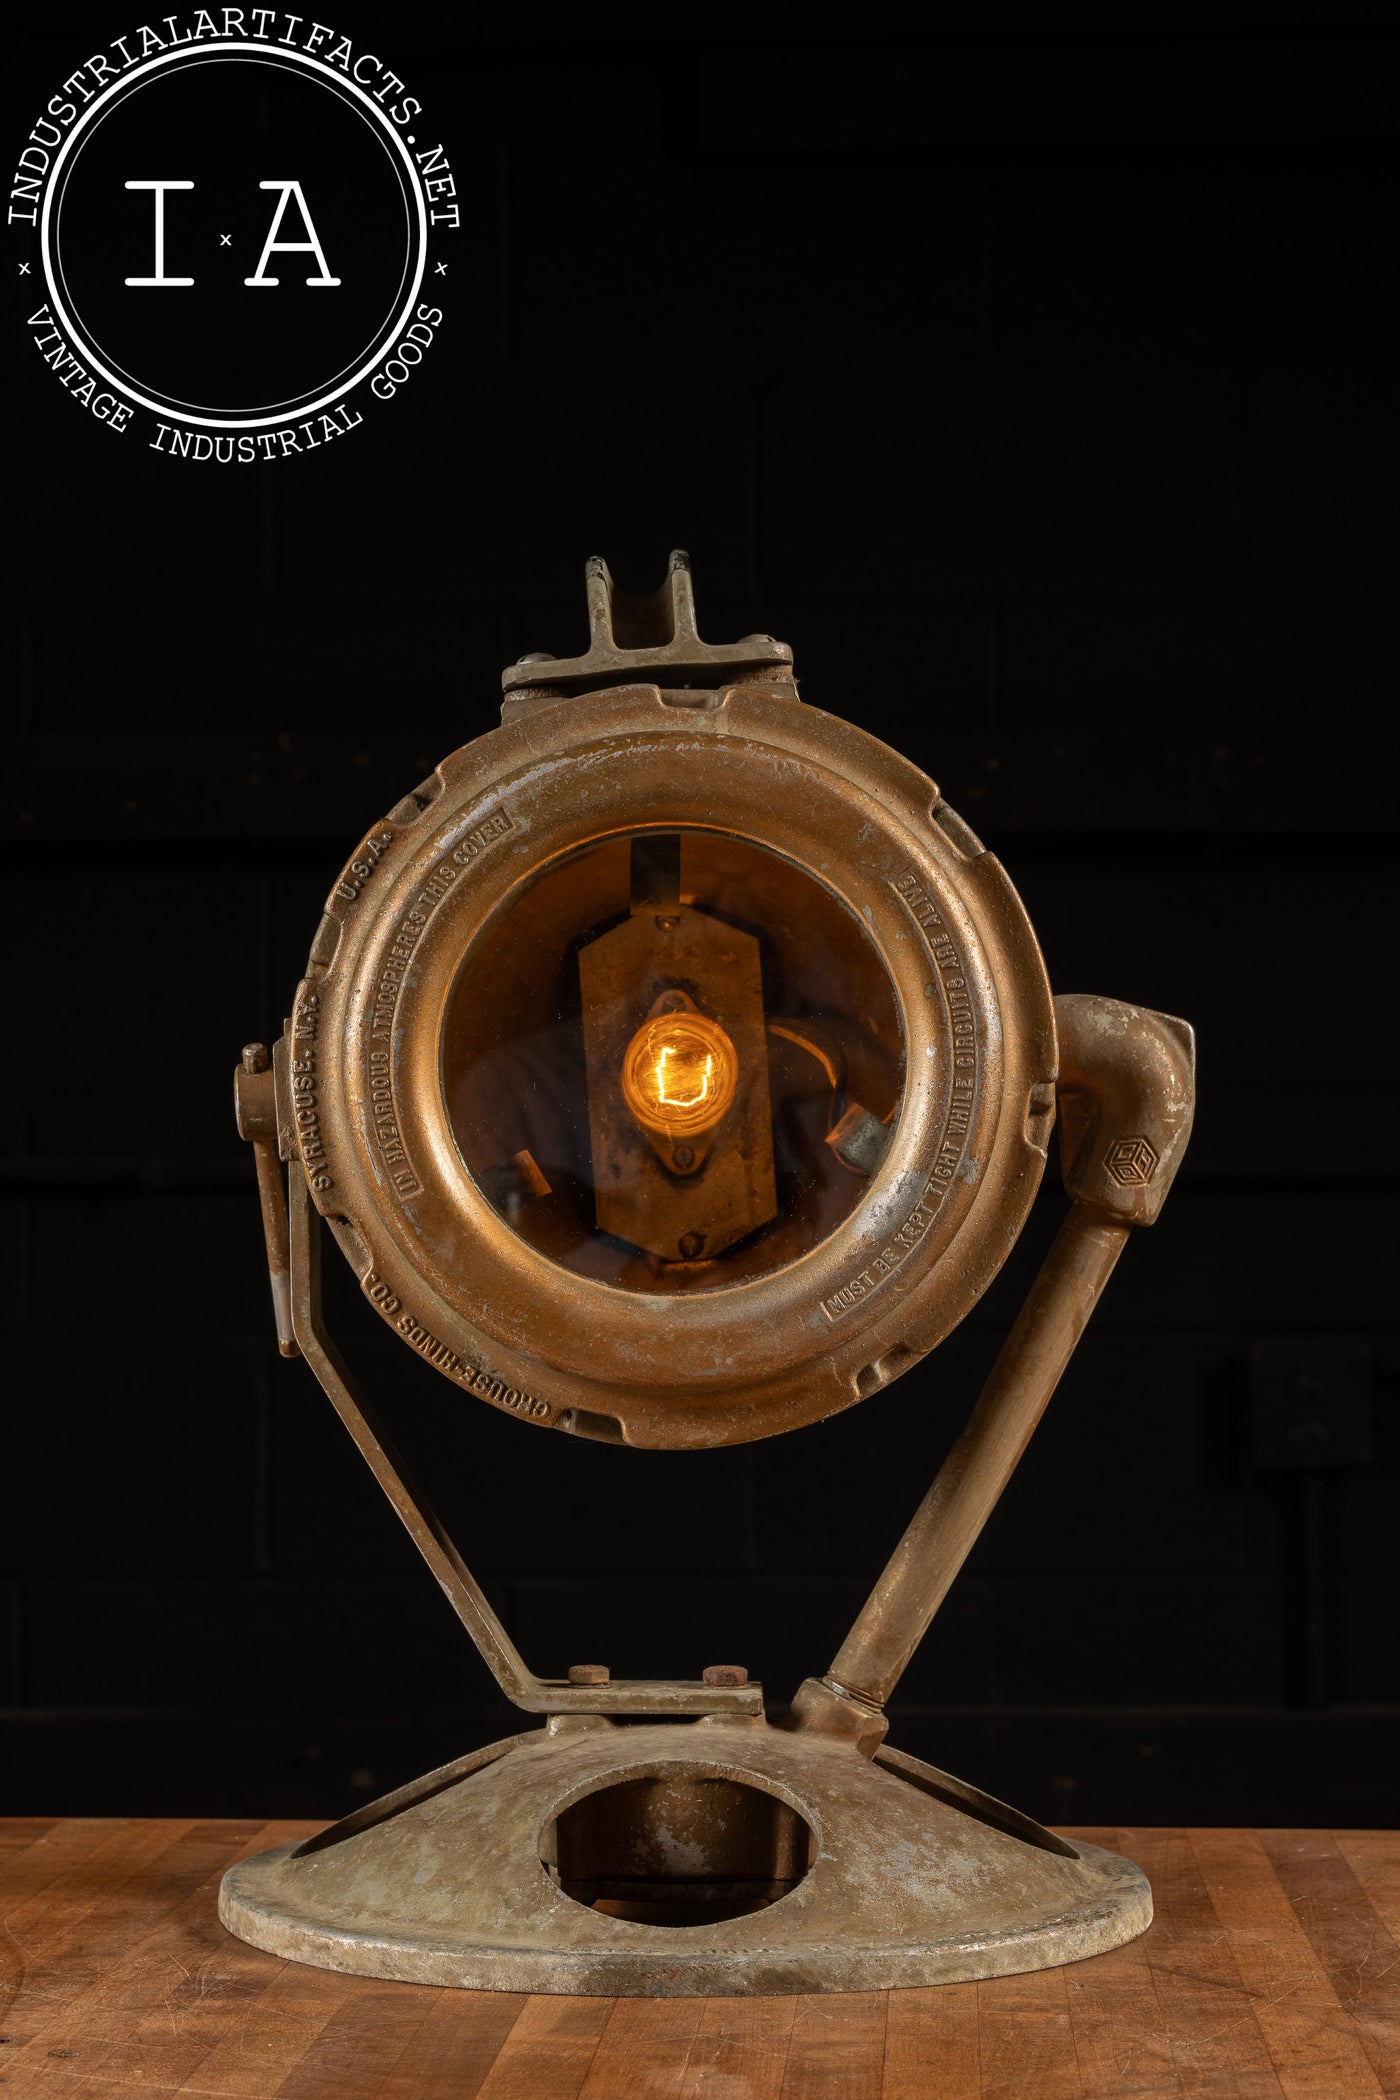 c. 1940s Crouse-Hinds Explosion Proof Spotlight